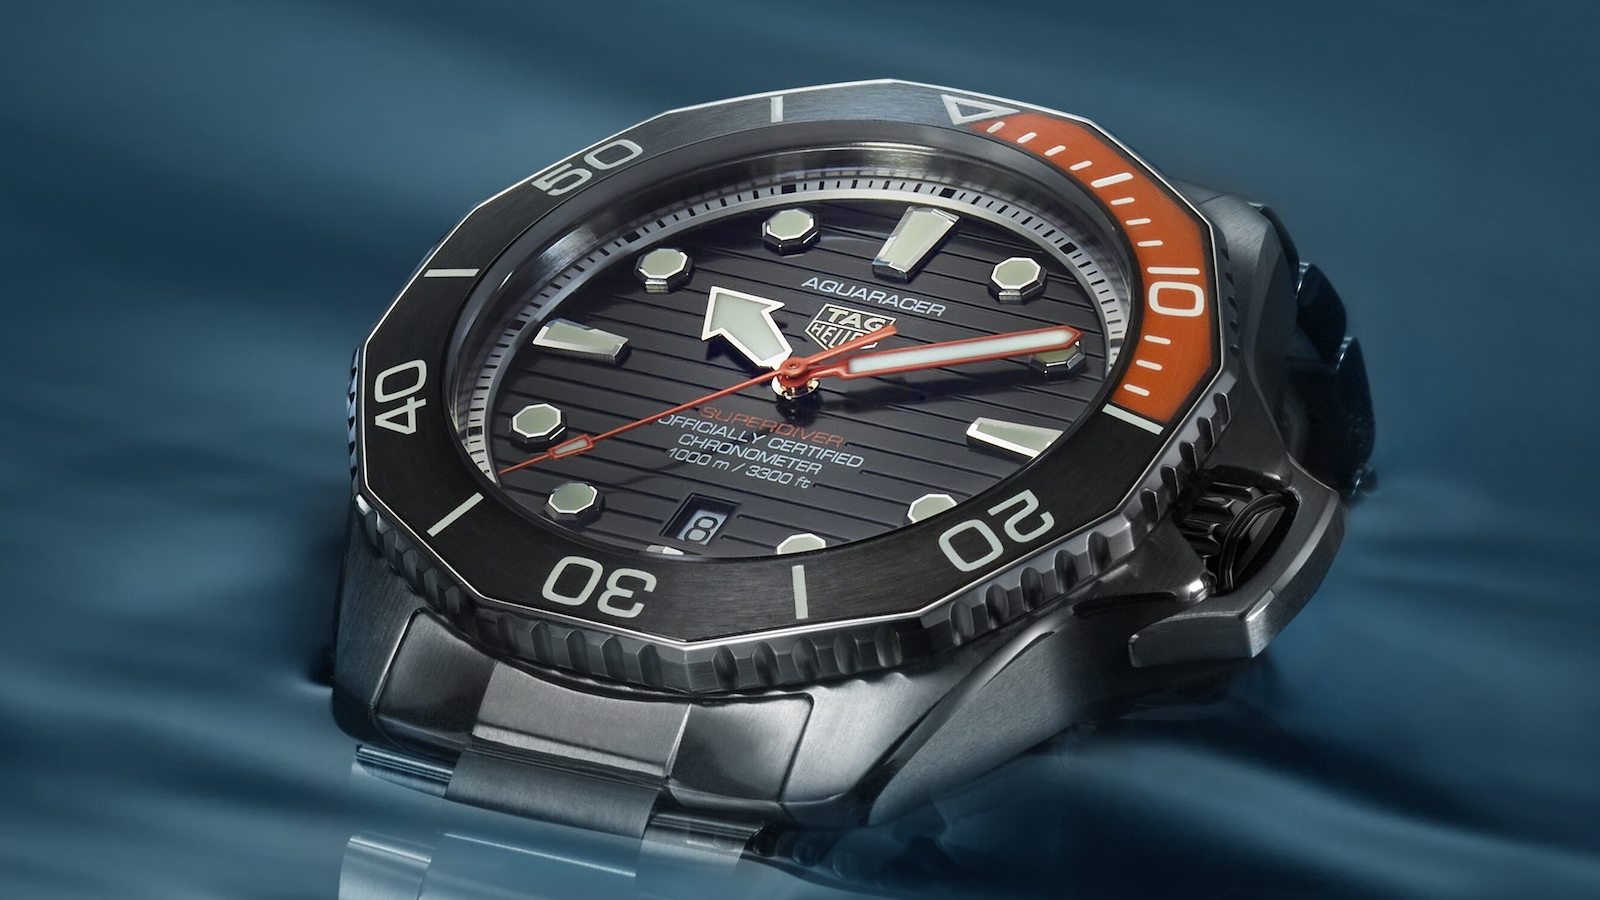 10 Best Dive Watches That Should Be On Your Sonar